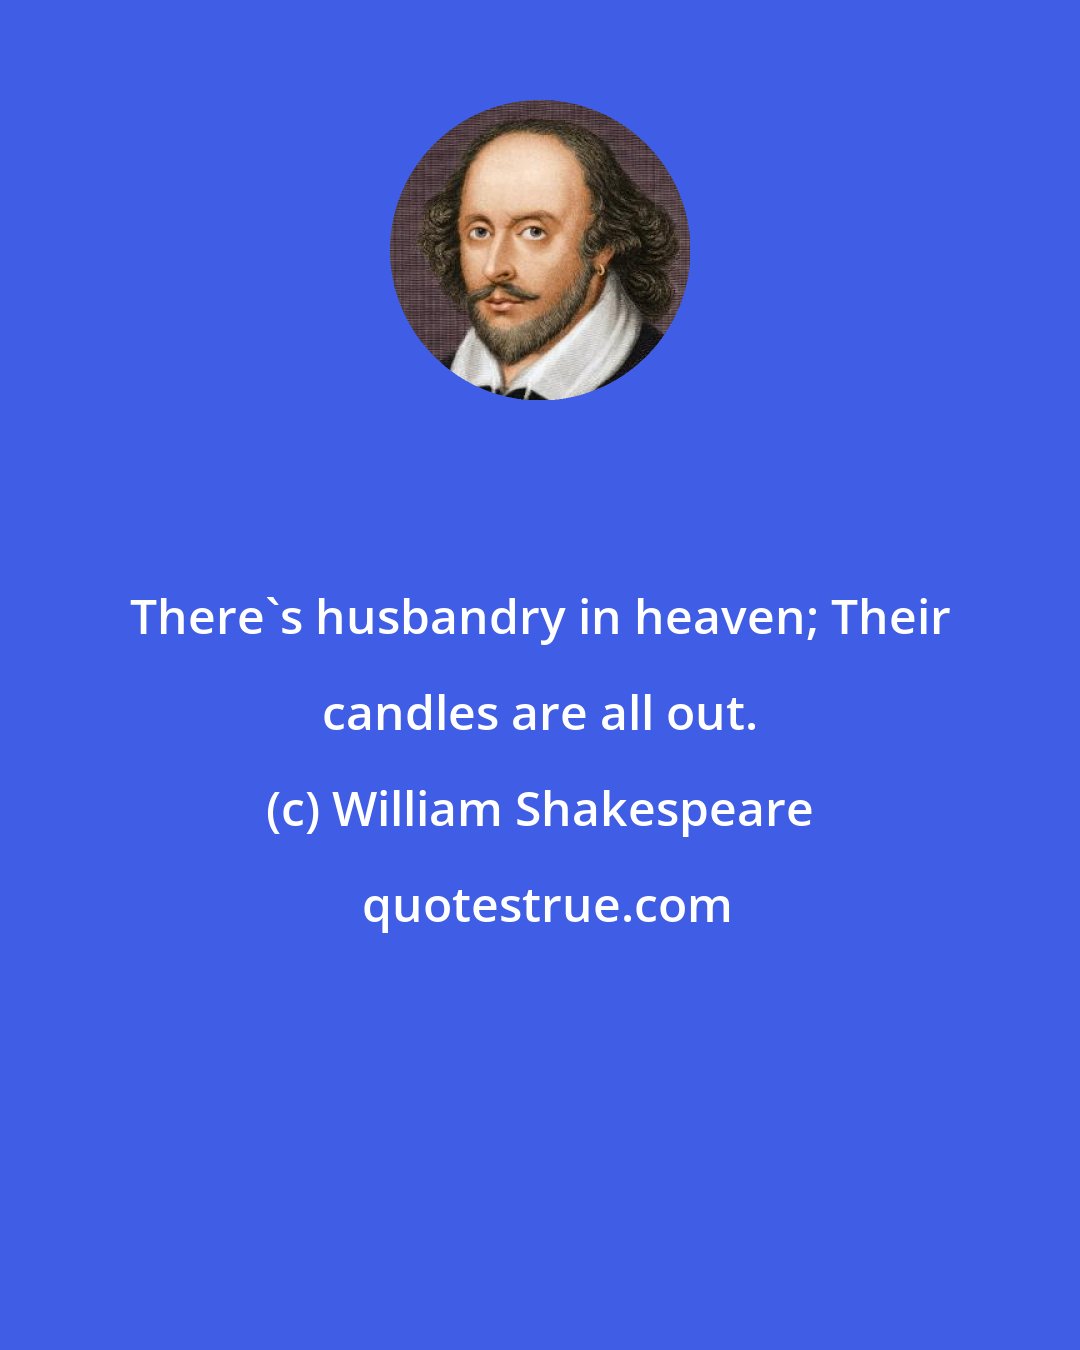 William Shakespeare: There's husbandry in heaven; Their candles are all out.